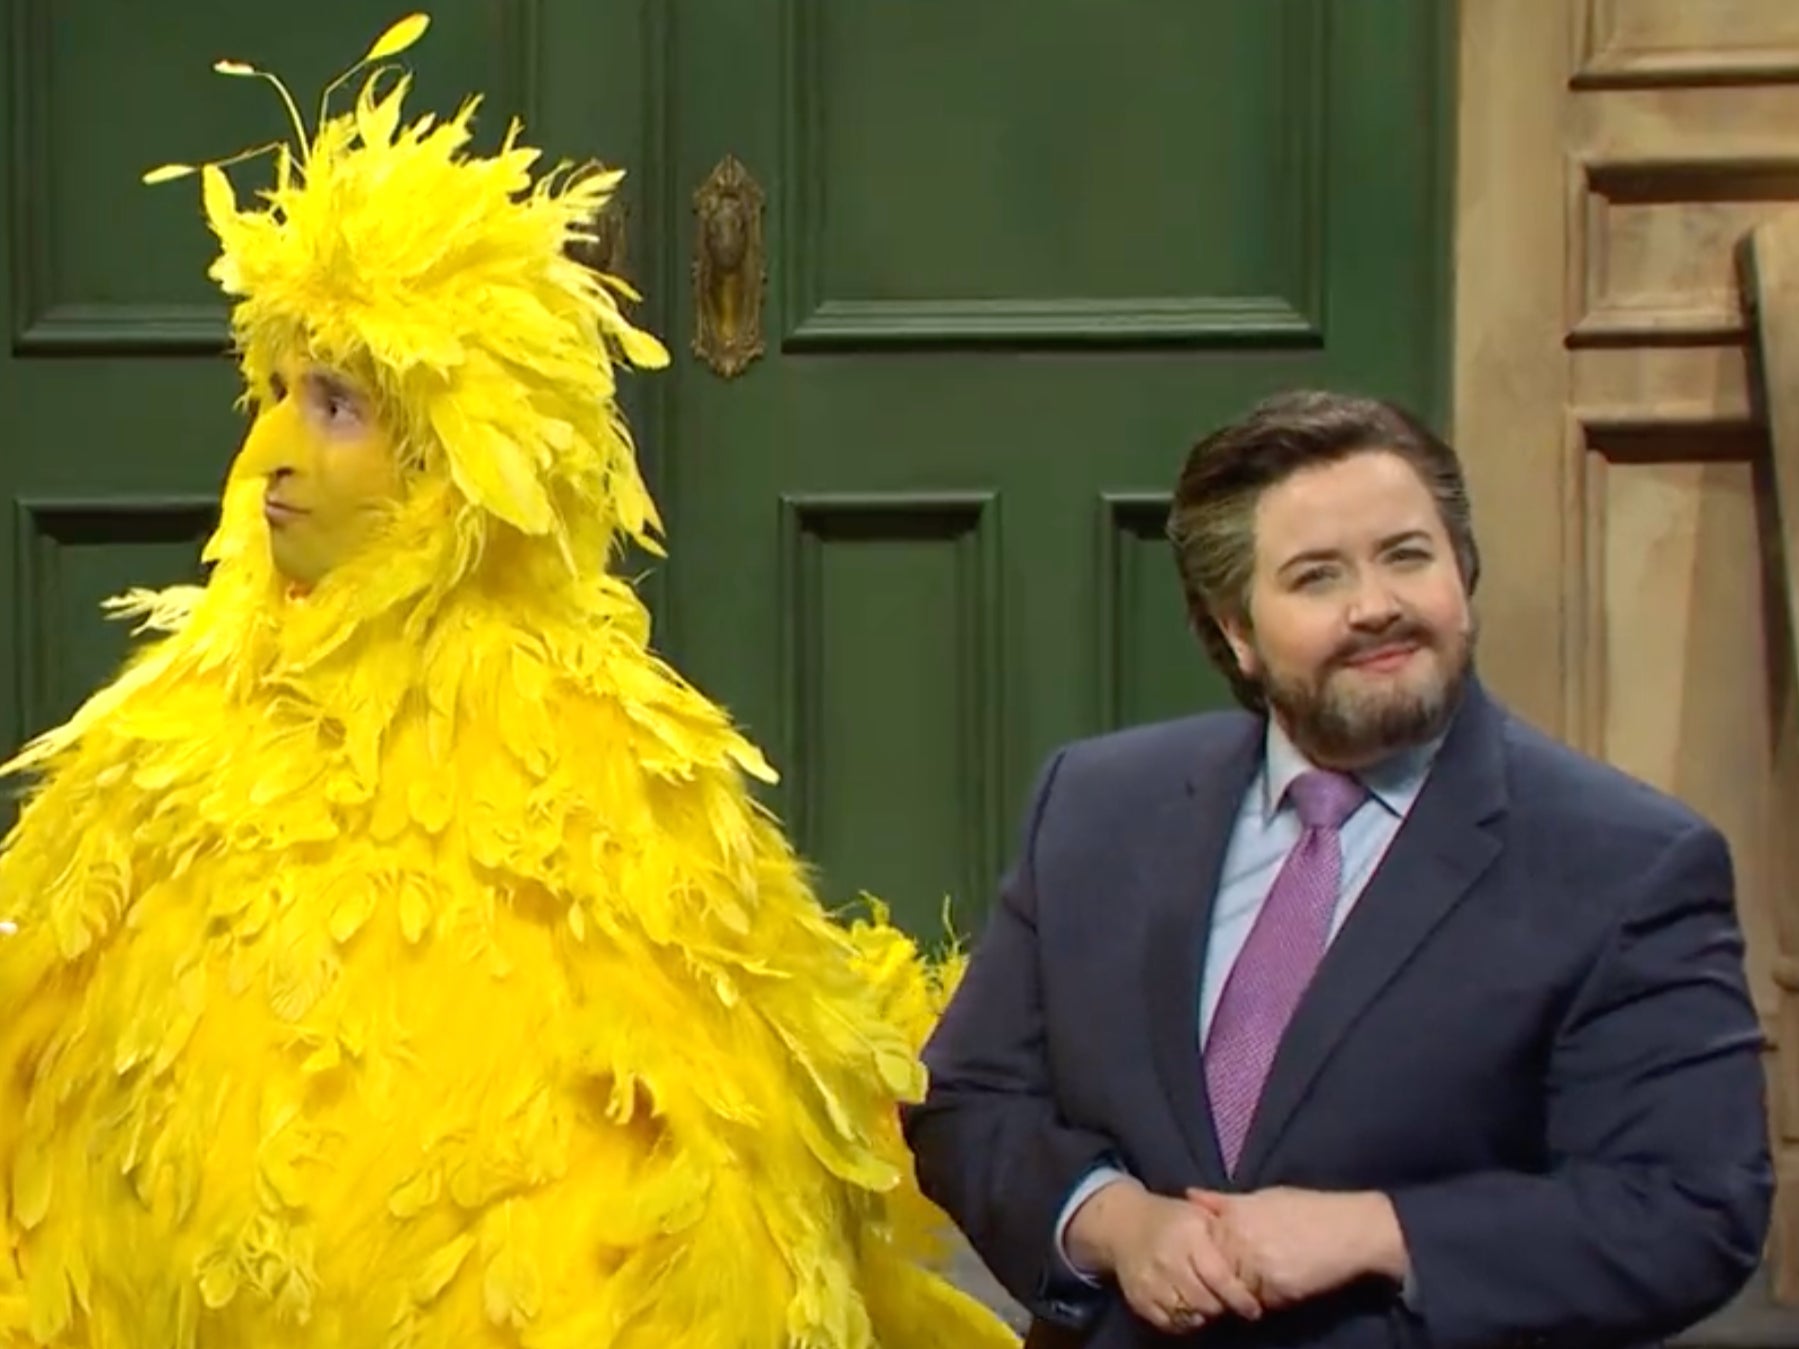 Aidy Bryant as Ted Cruz and Kyle Mooney as Big Bird on SNL